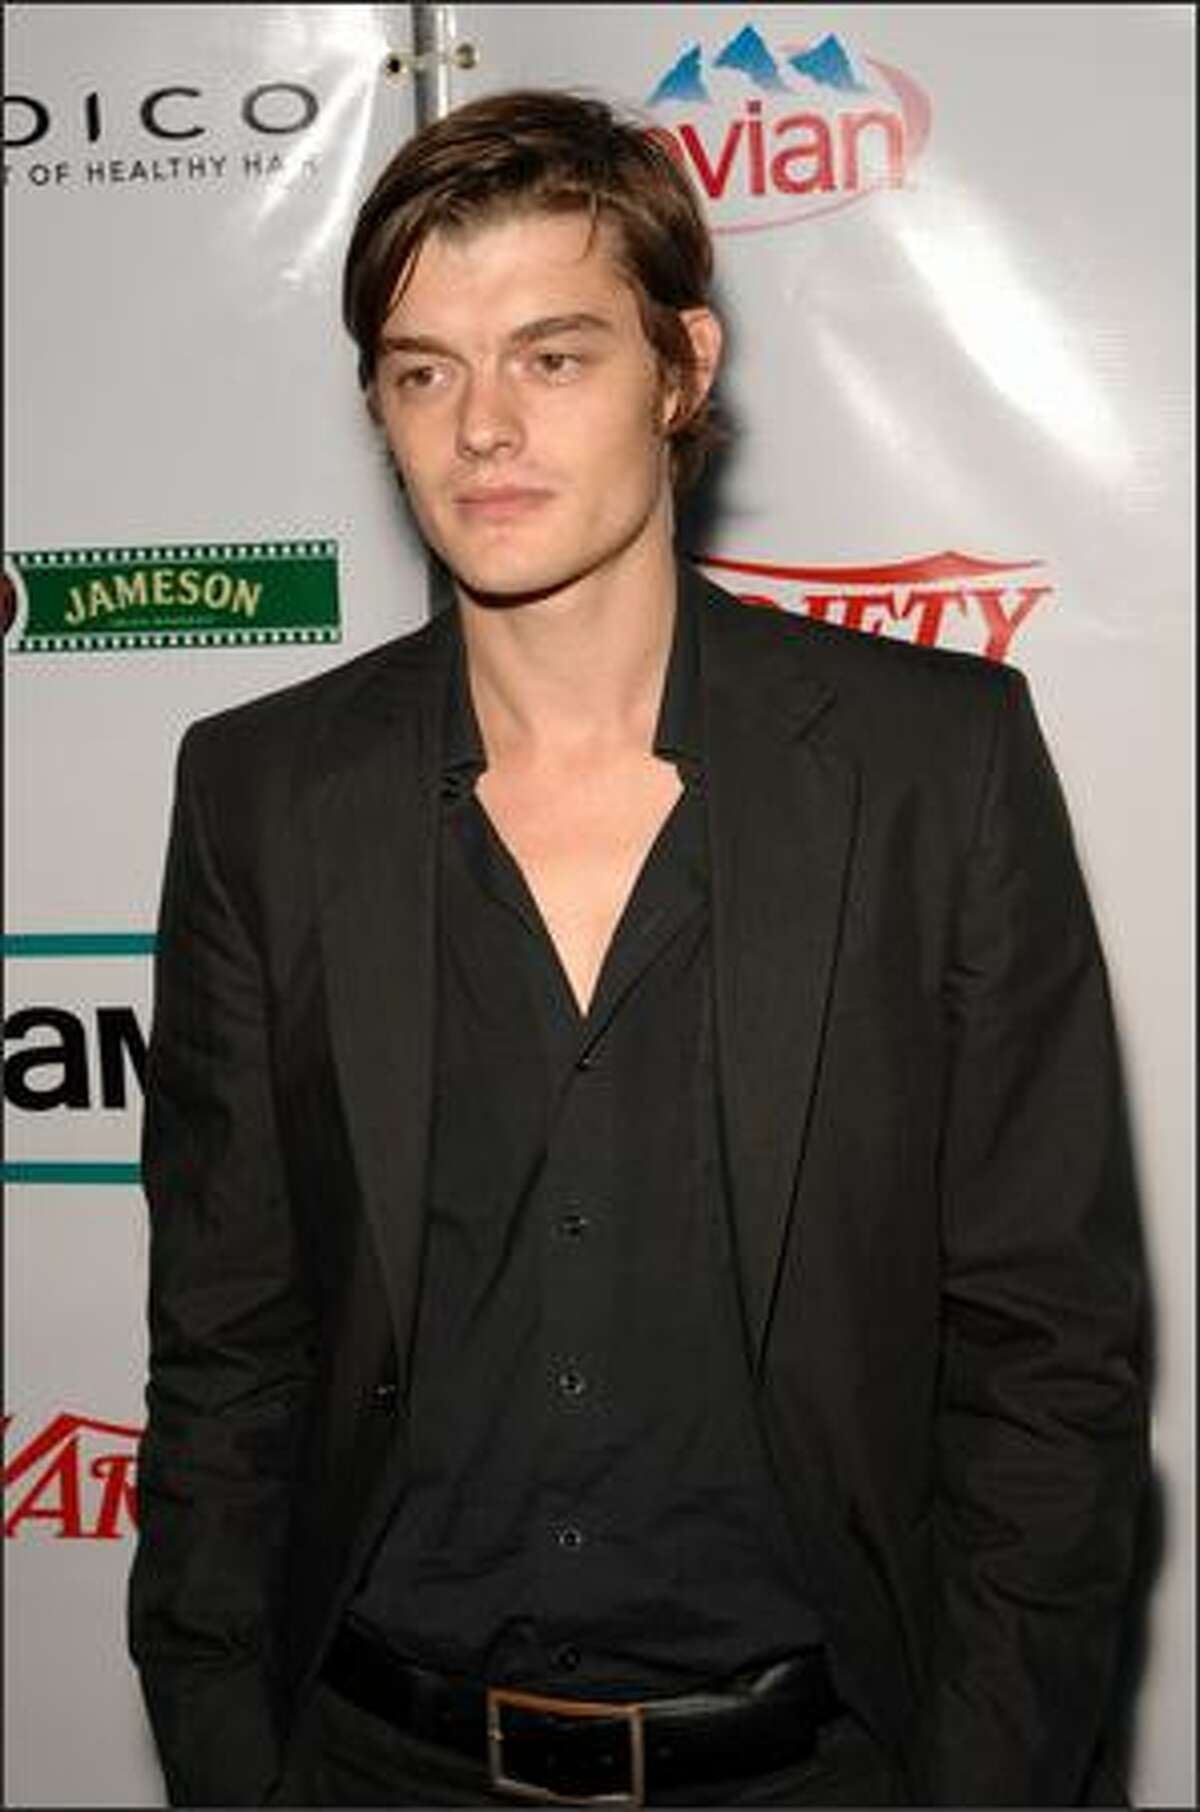 Actor Sam Riley attends the Film Lounge Presented by Variety and AMC for the North American premiere after party for "Control" during the Toronto International Film Festival 2007 held at the W Lounge on September 7, 2007 in Toronto, Canada.